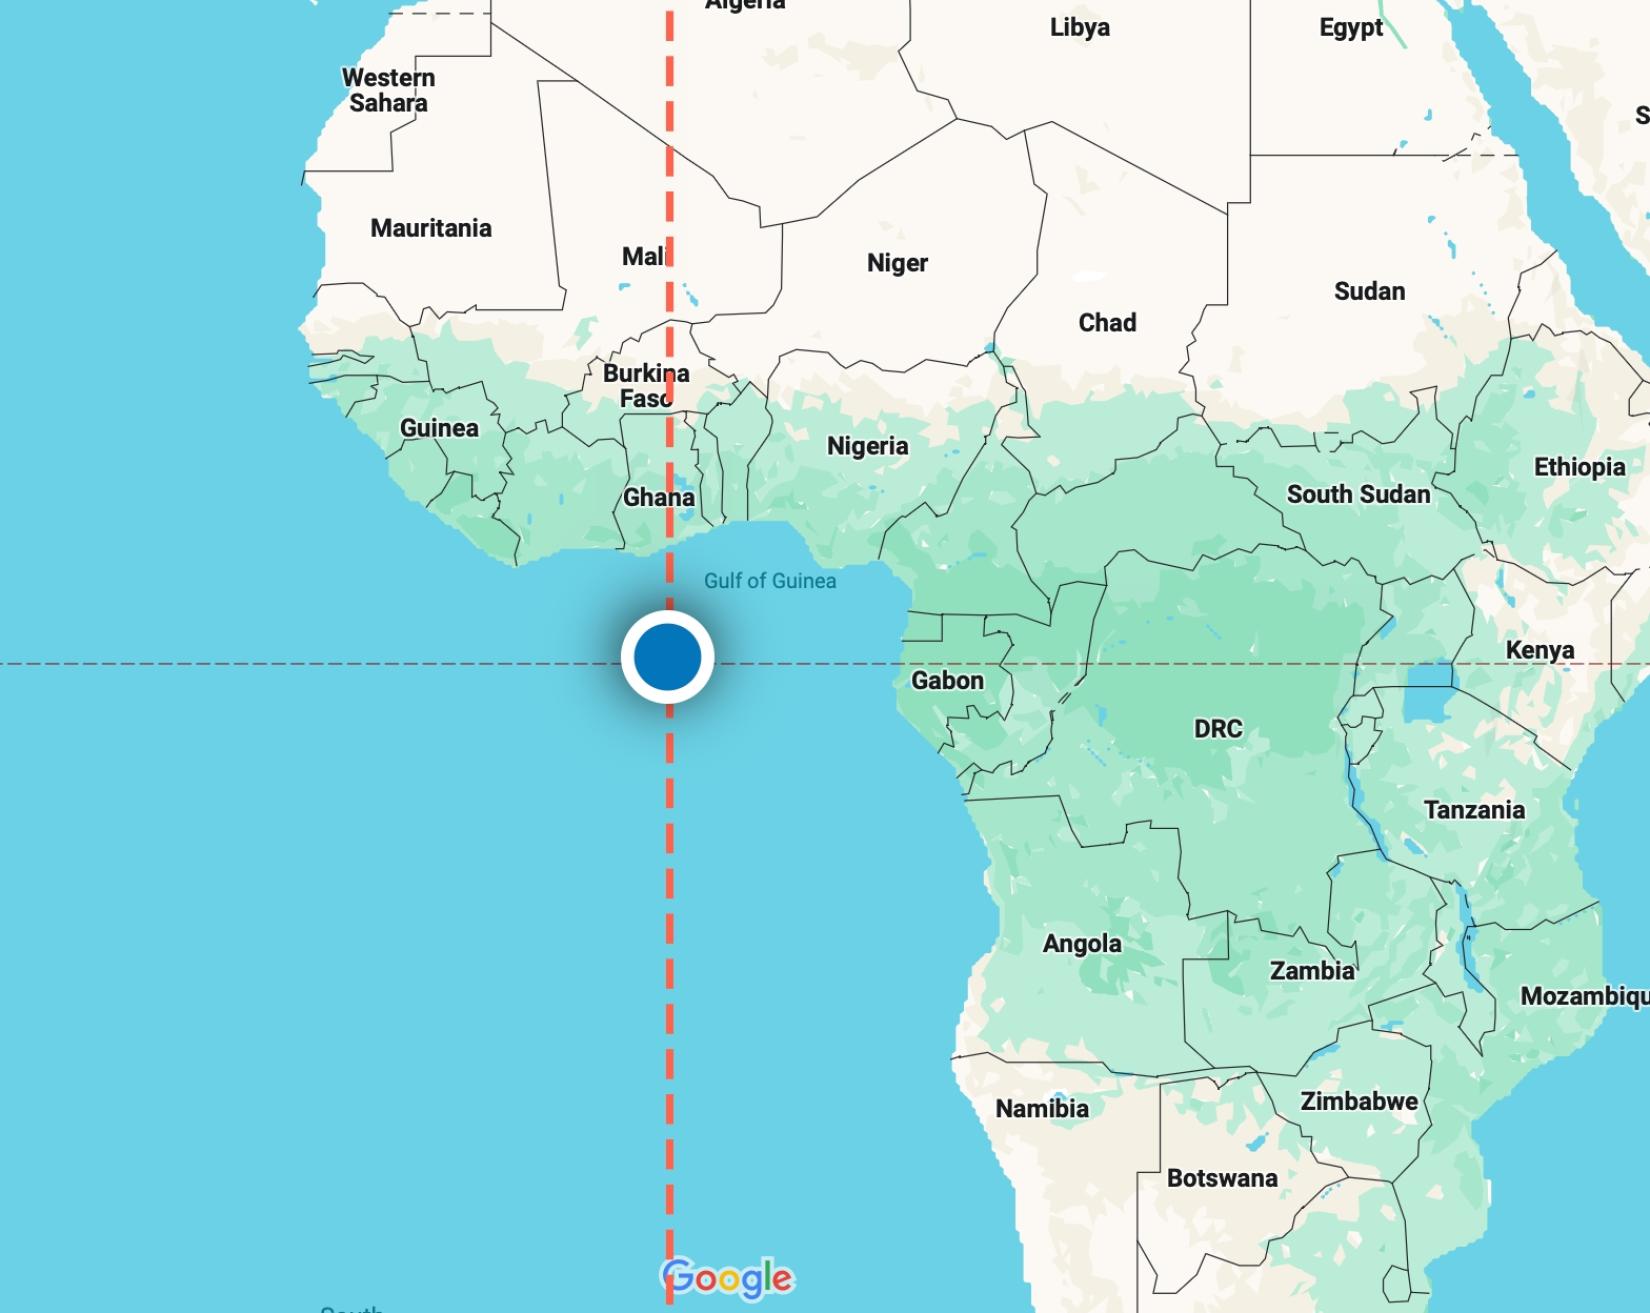 Null Island with Prime Meridian